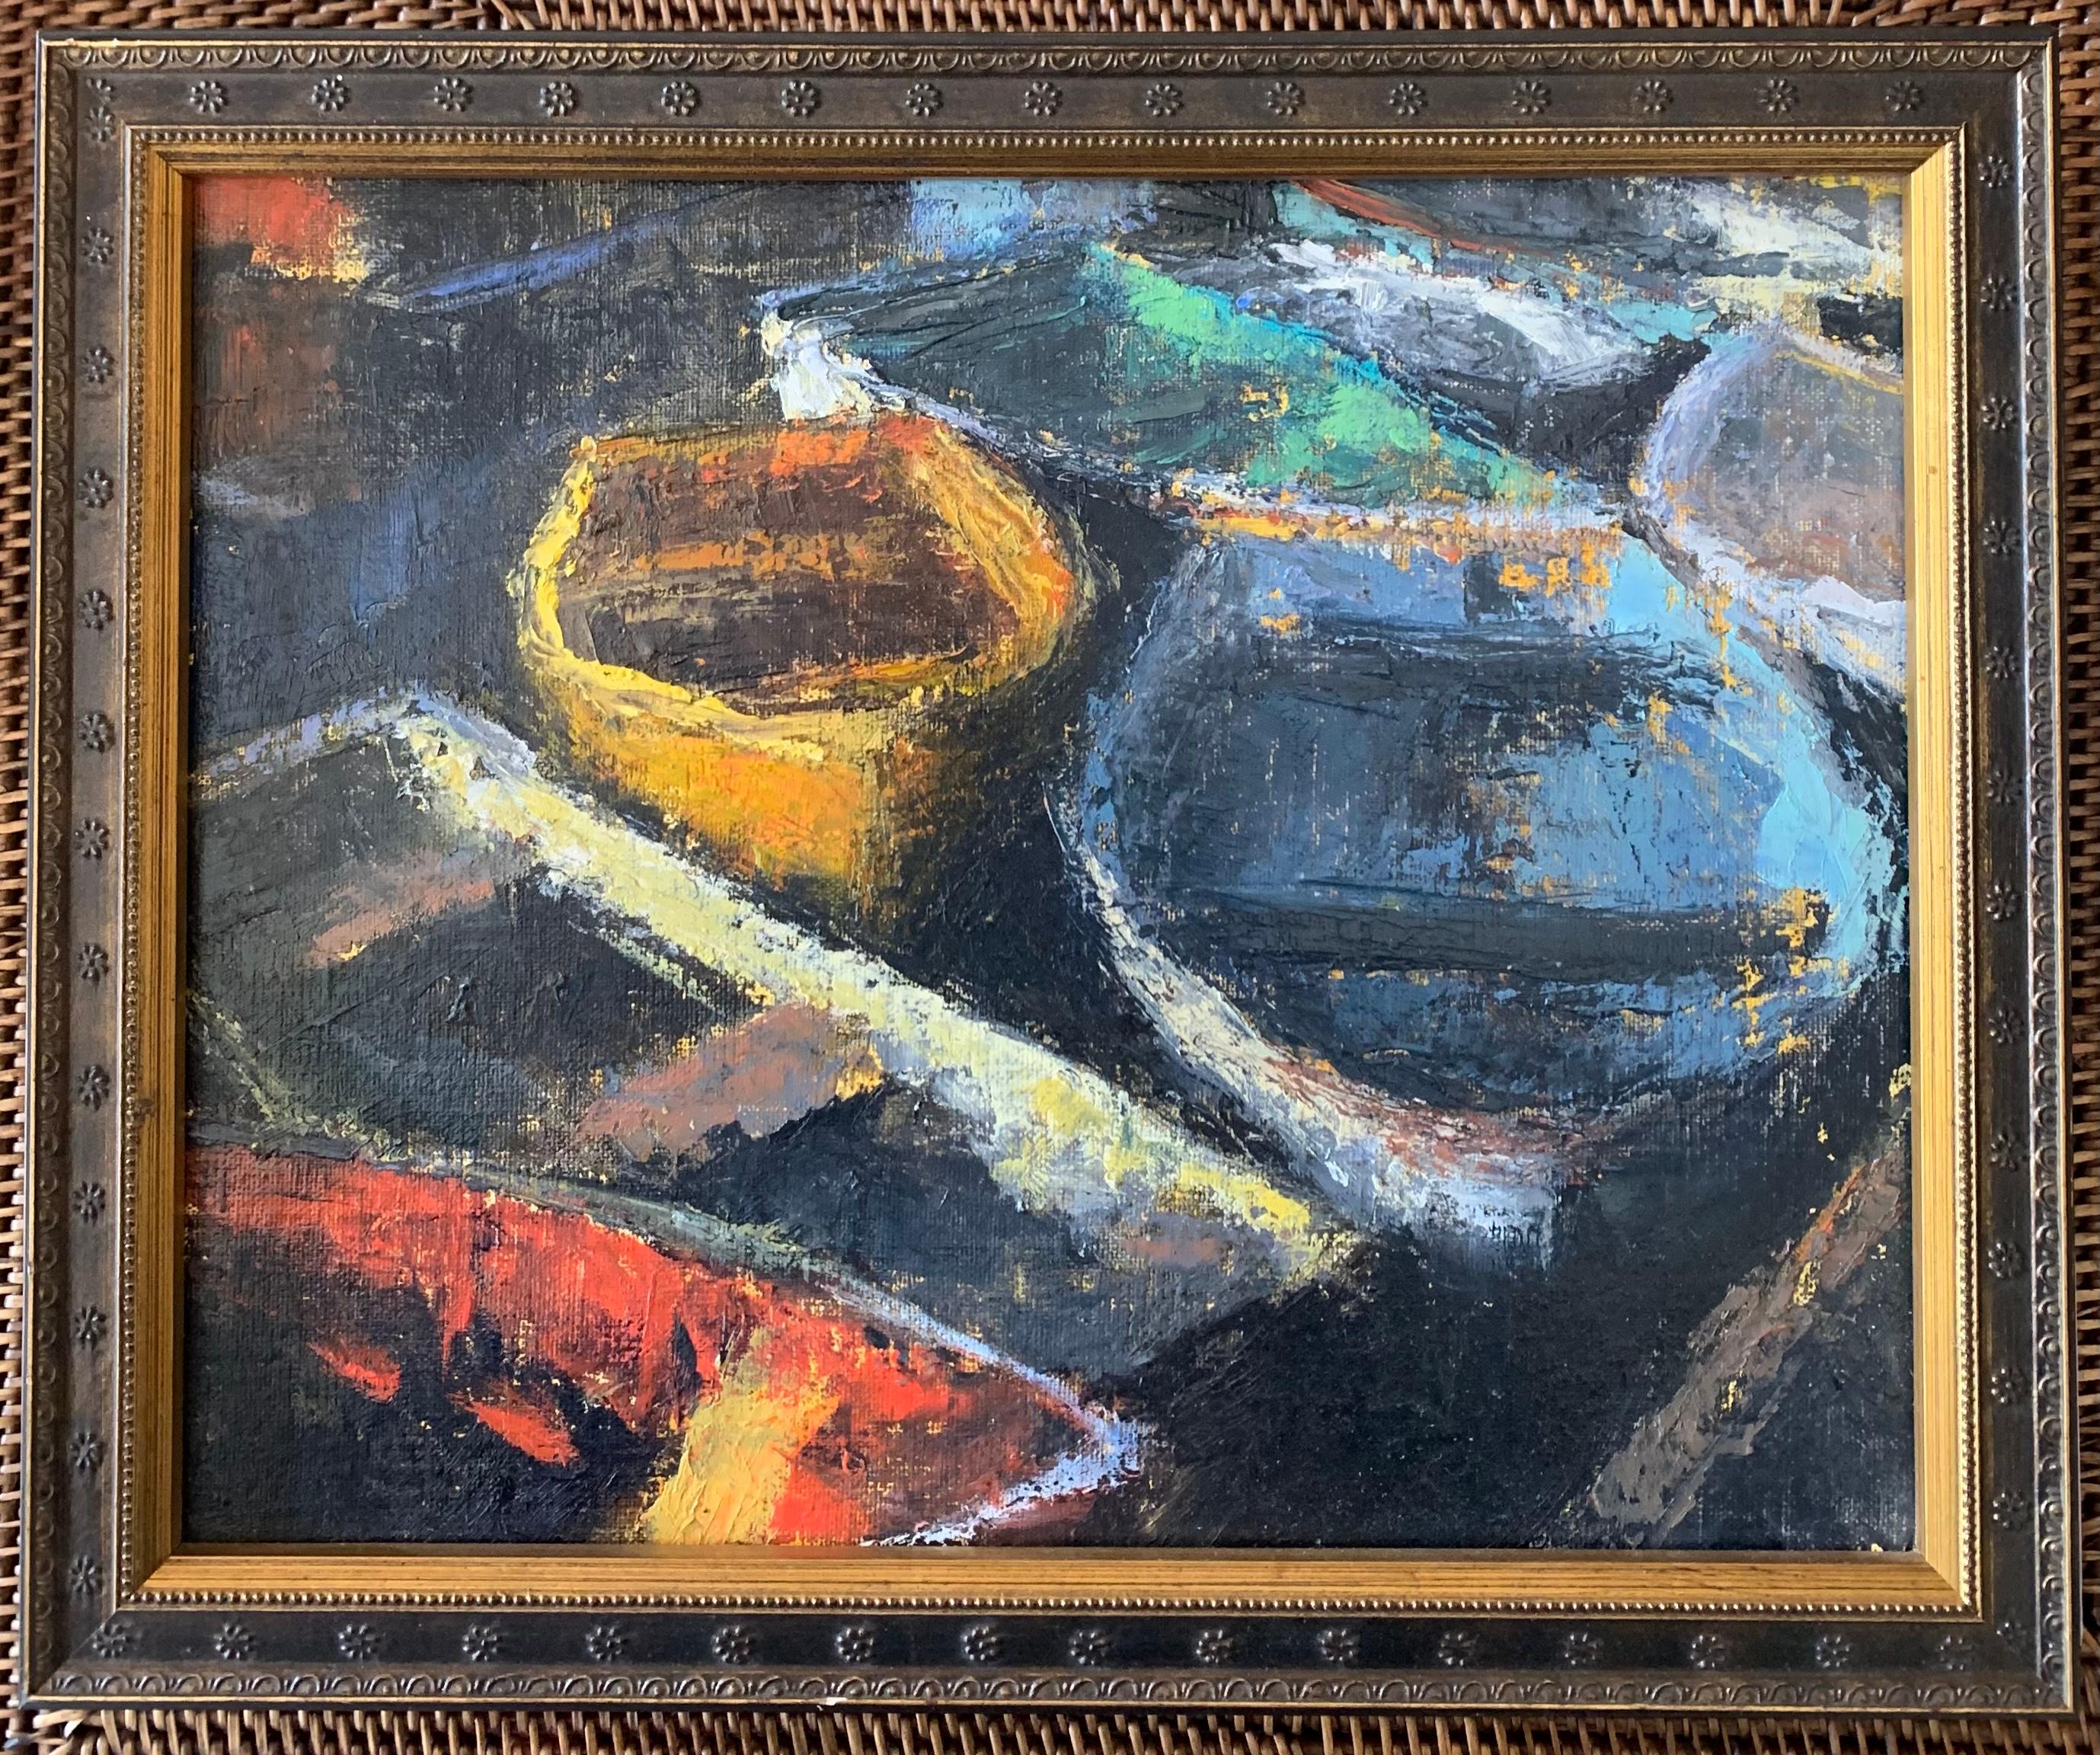 Dinghies Two
10.0 x 81.0 x 1.0, 5.0 lbs 
Oil Paint
Hand signed by artist 

Description:
An original, contemporary oil painting by Carol Tippit Woolworth. Inspired by the Impressionists, she depicts dinghies nestled among other boats floating in the